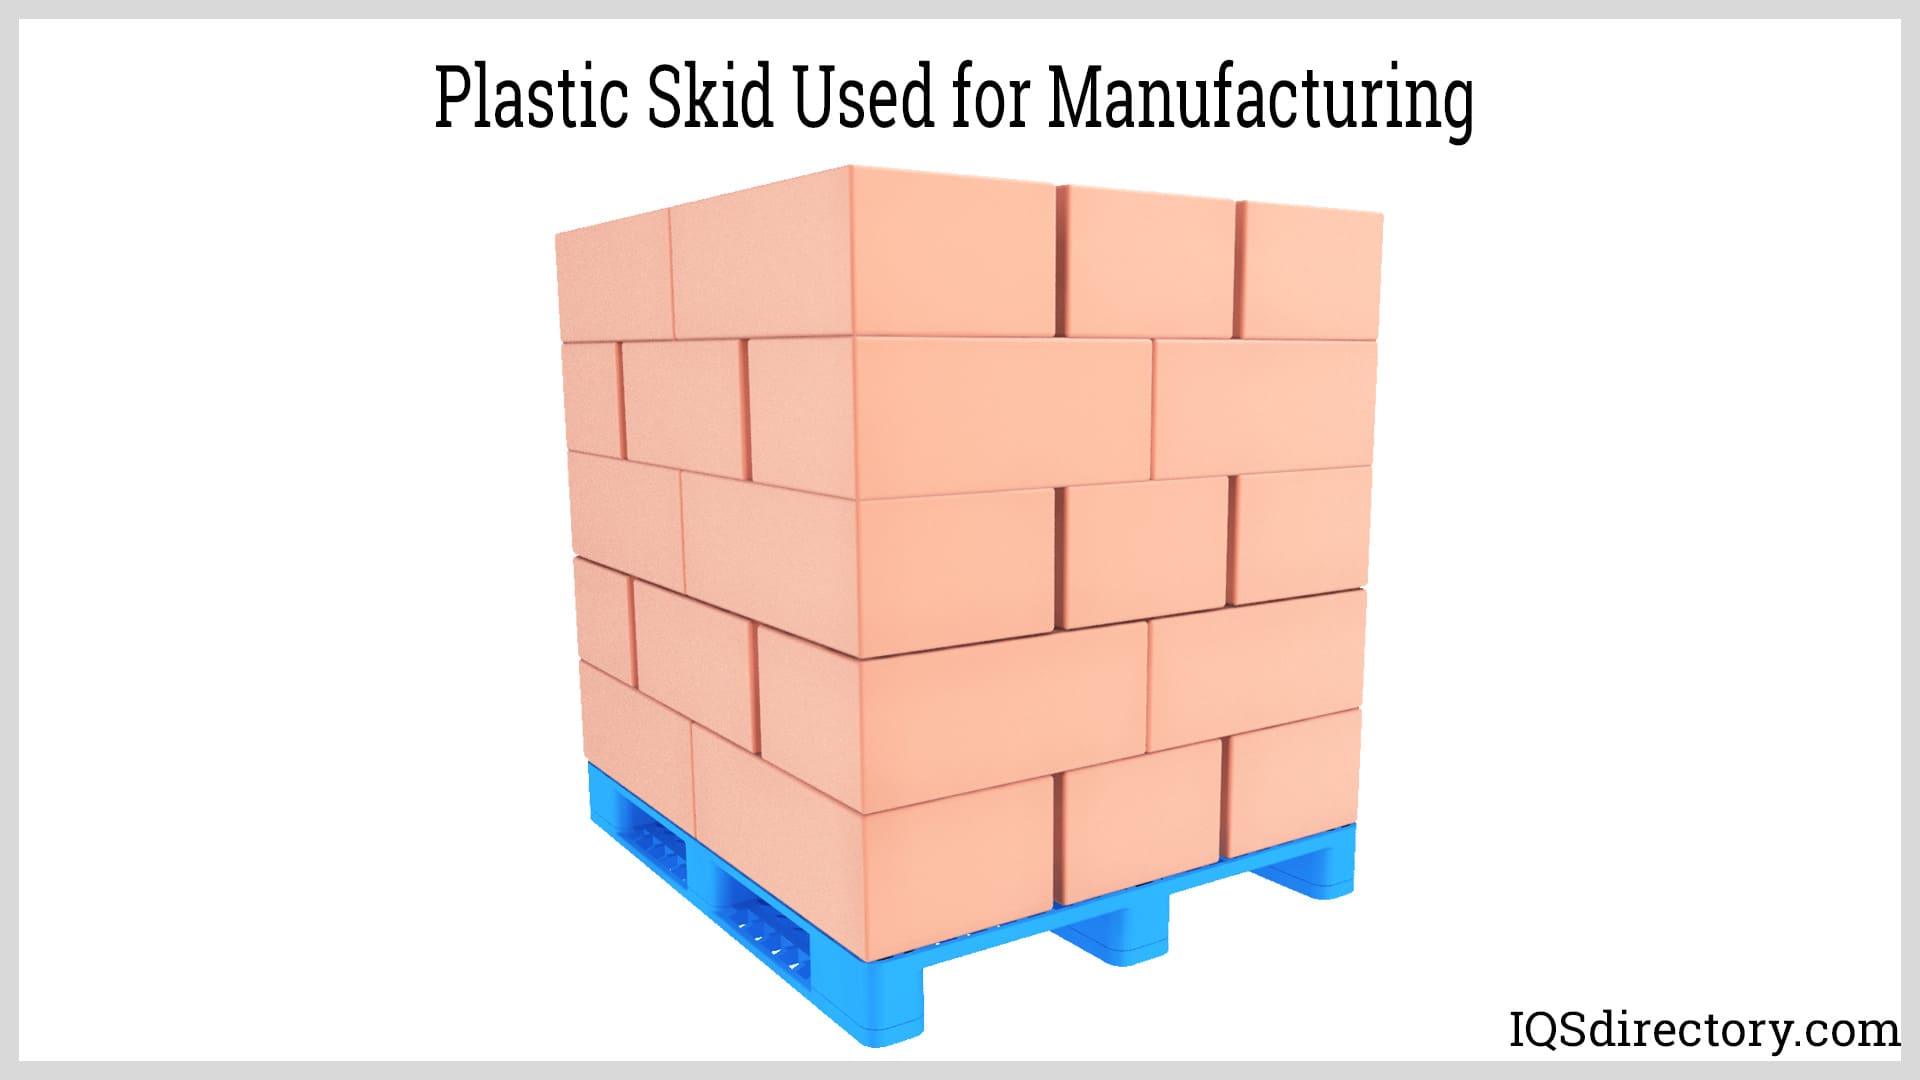 Plastic Skid Used for Manufacturing